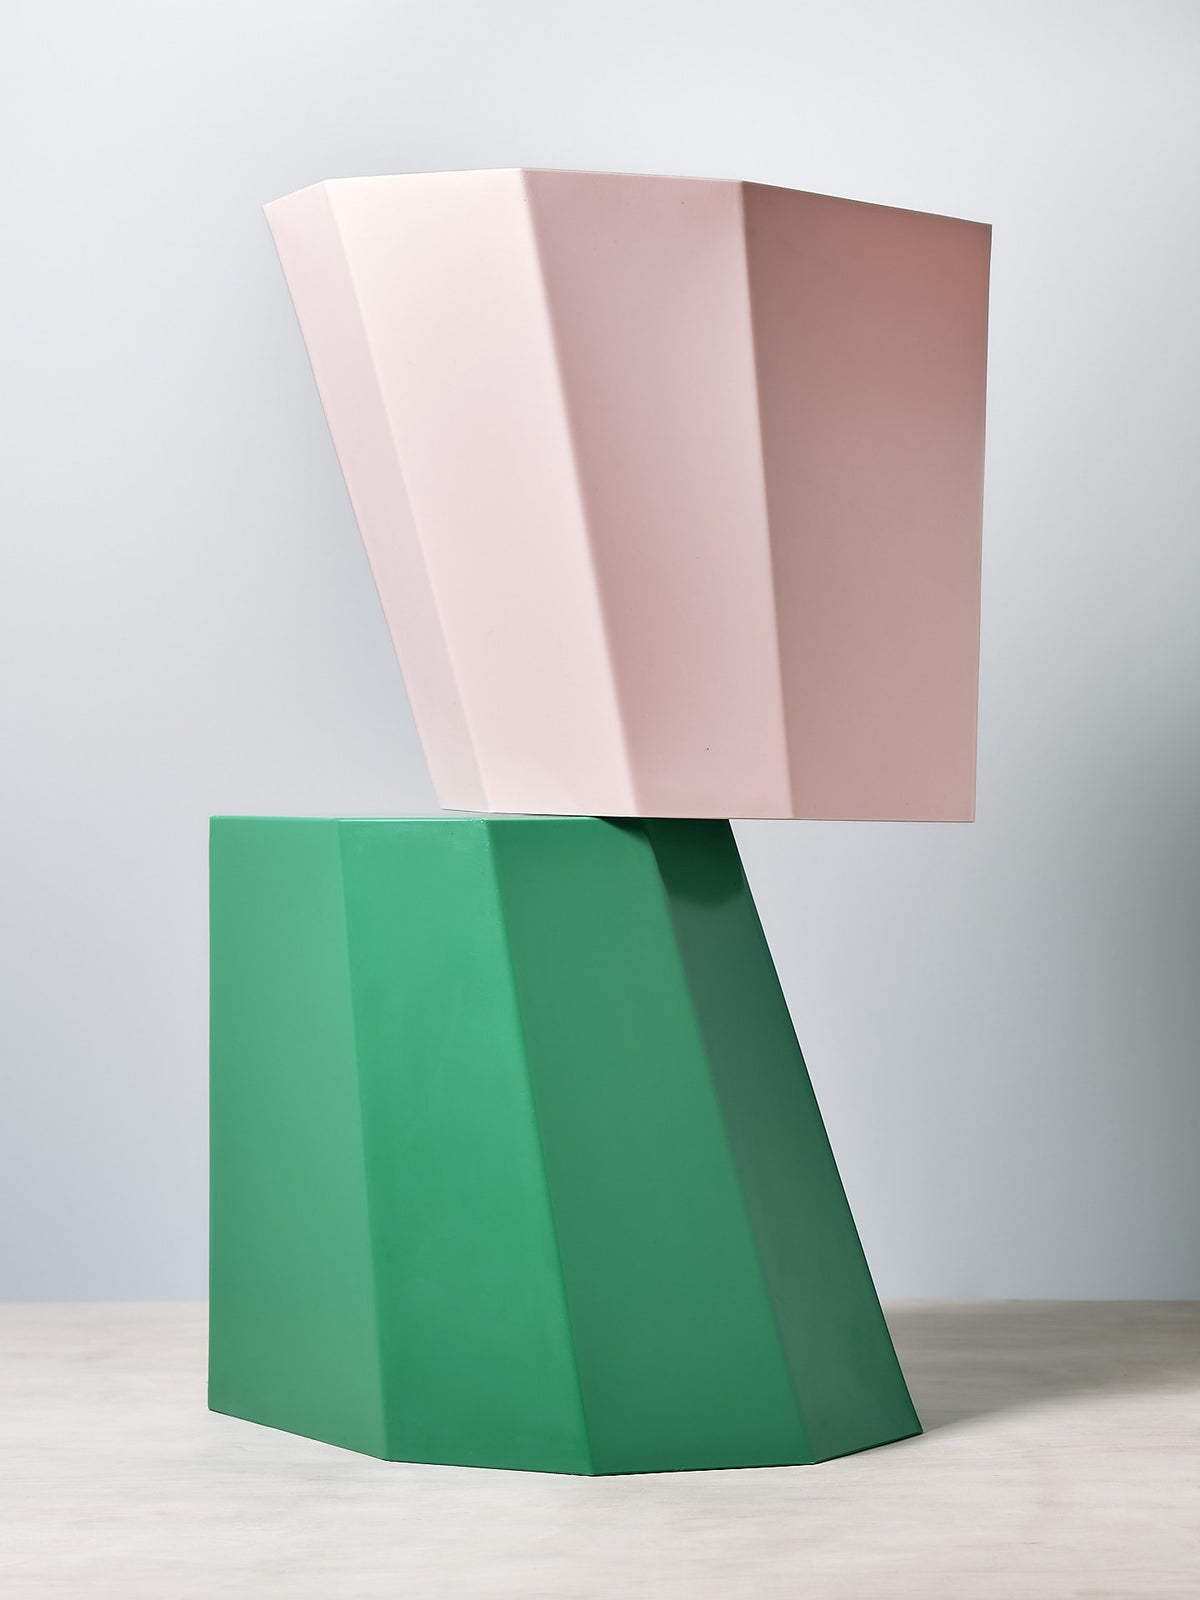 Two Martino Gamper Arnoldino Stools - Pink and green geometric shapes on top of a table.